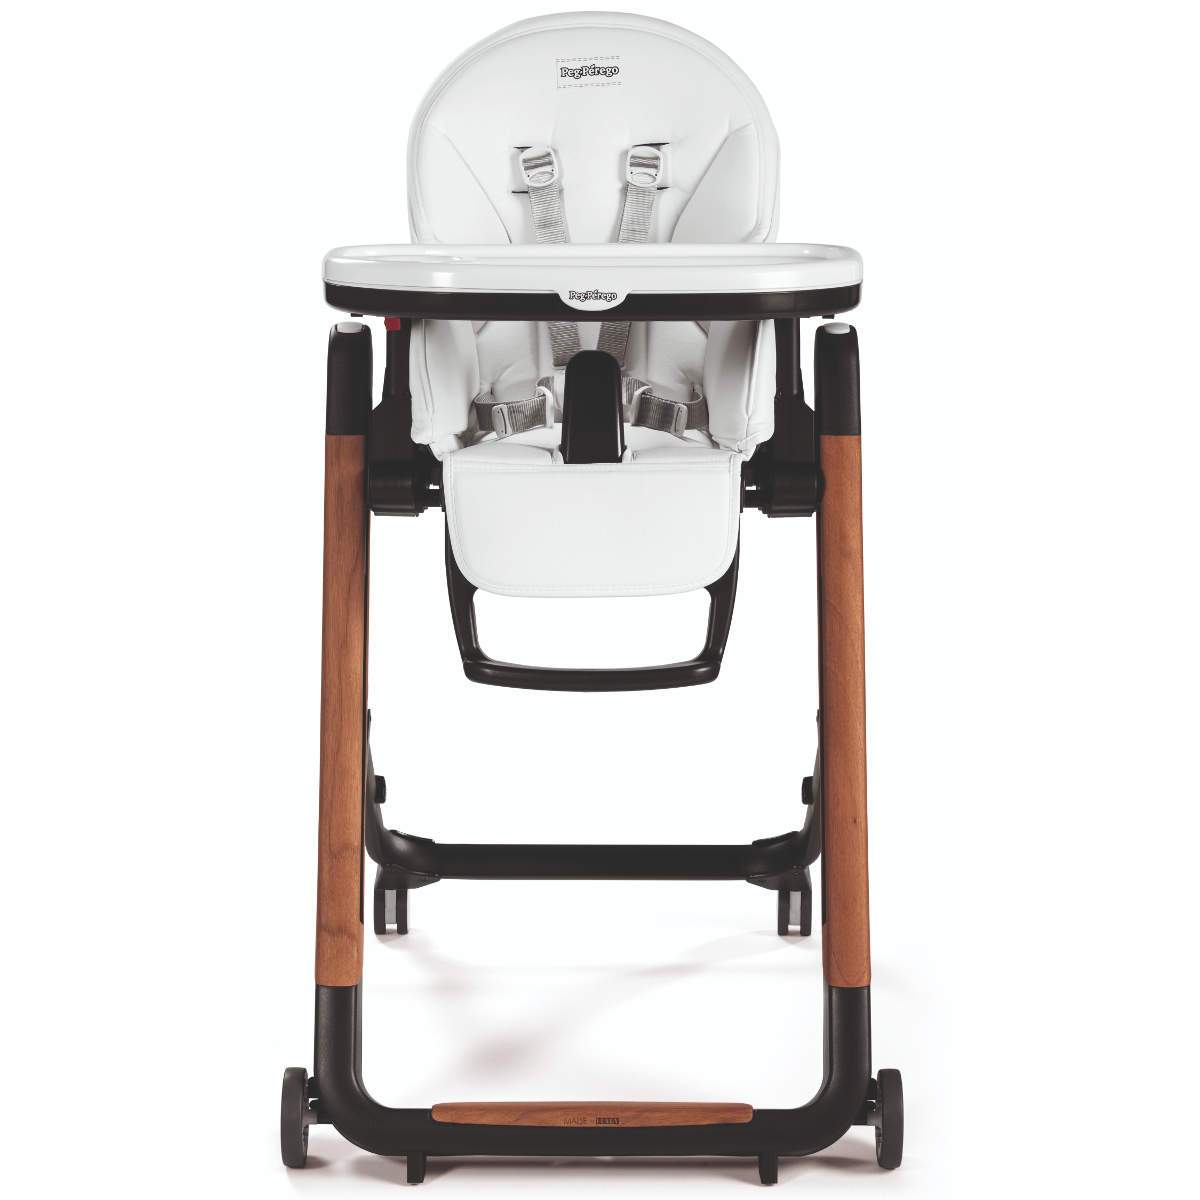 Agio by Peg Perego Siesta High Chair  EXCLUSIVE! – Lakeland Baby and Teen  Furniture